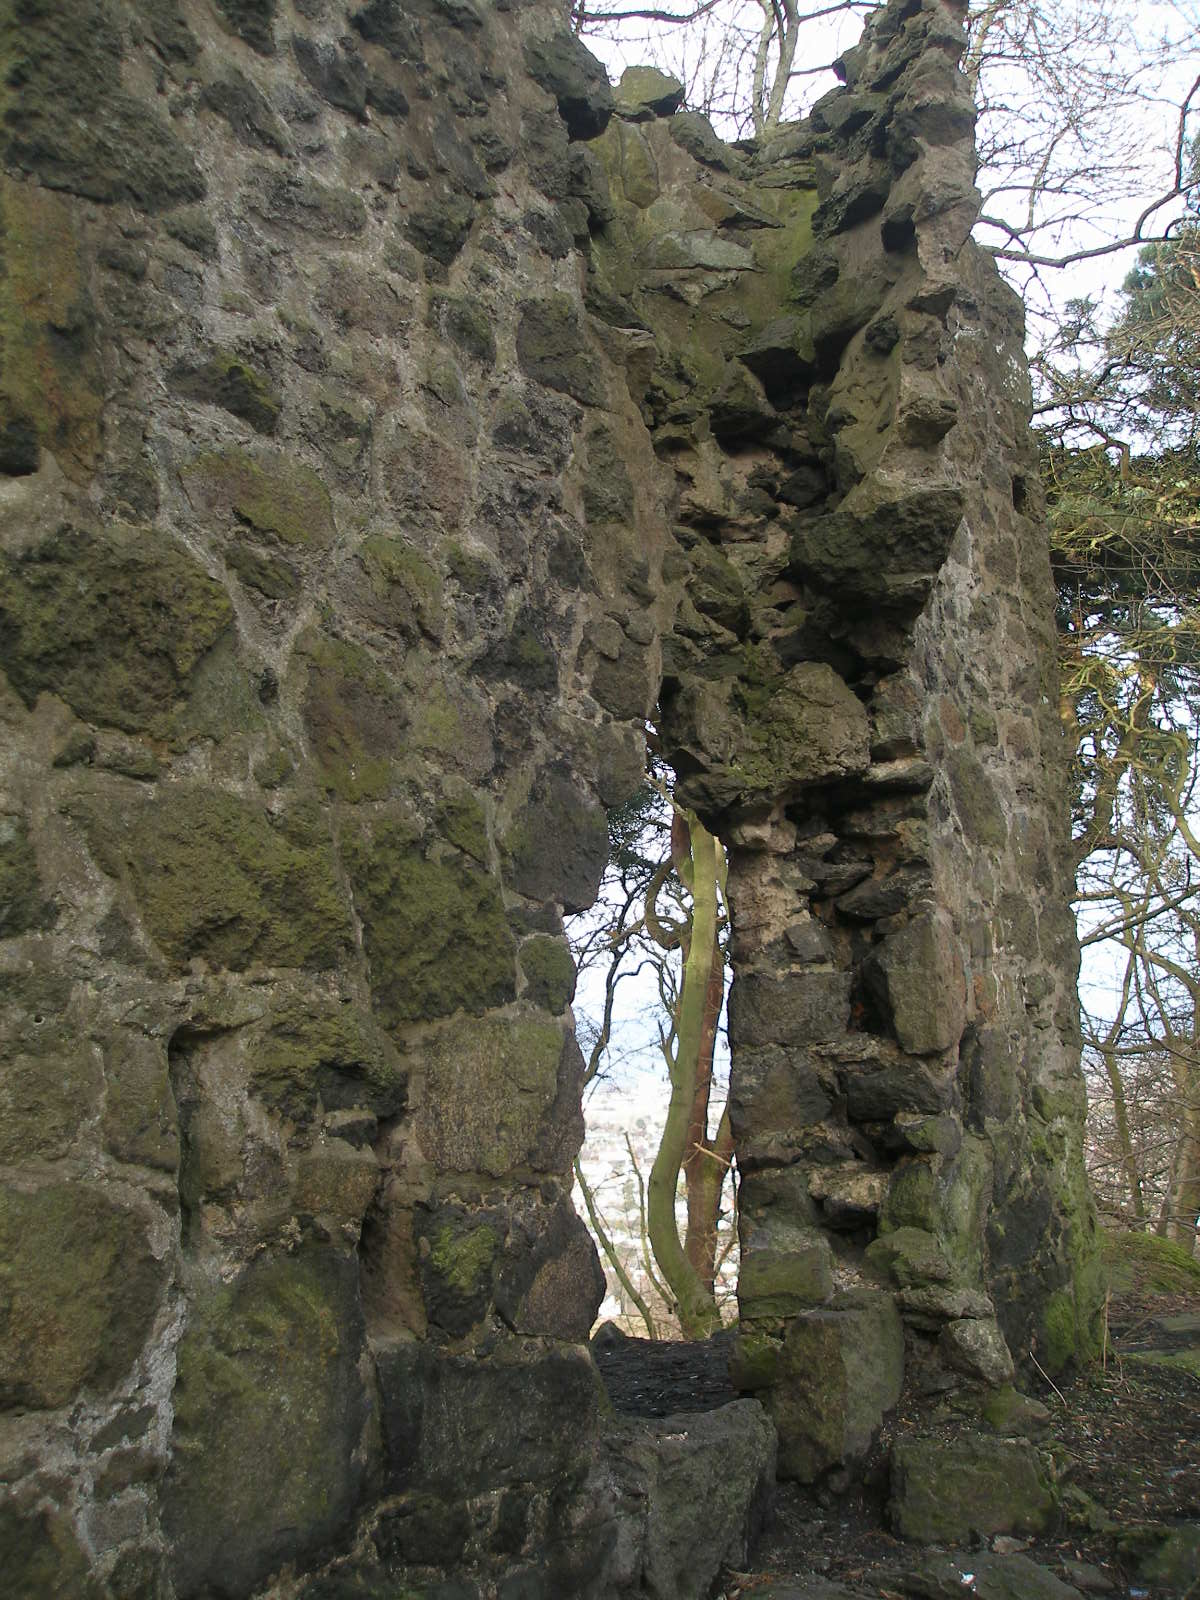 there is a stone window in the wall with trees